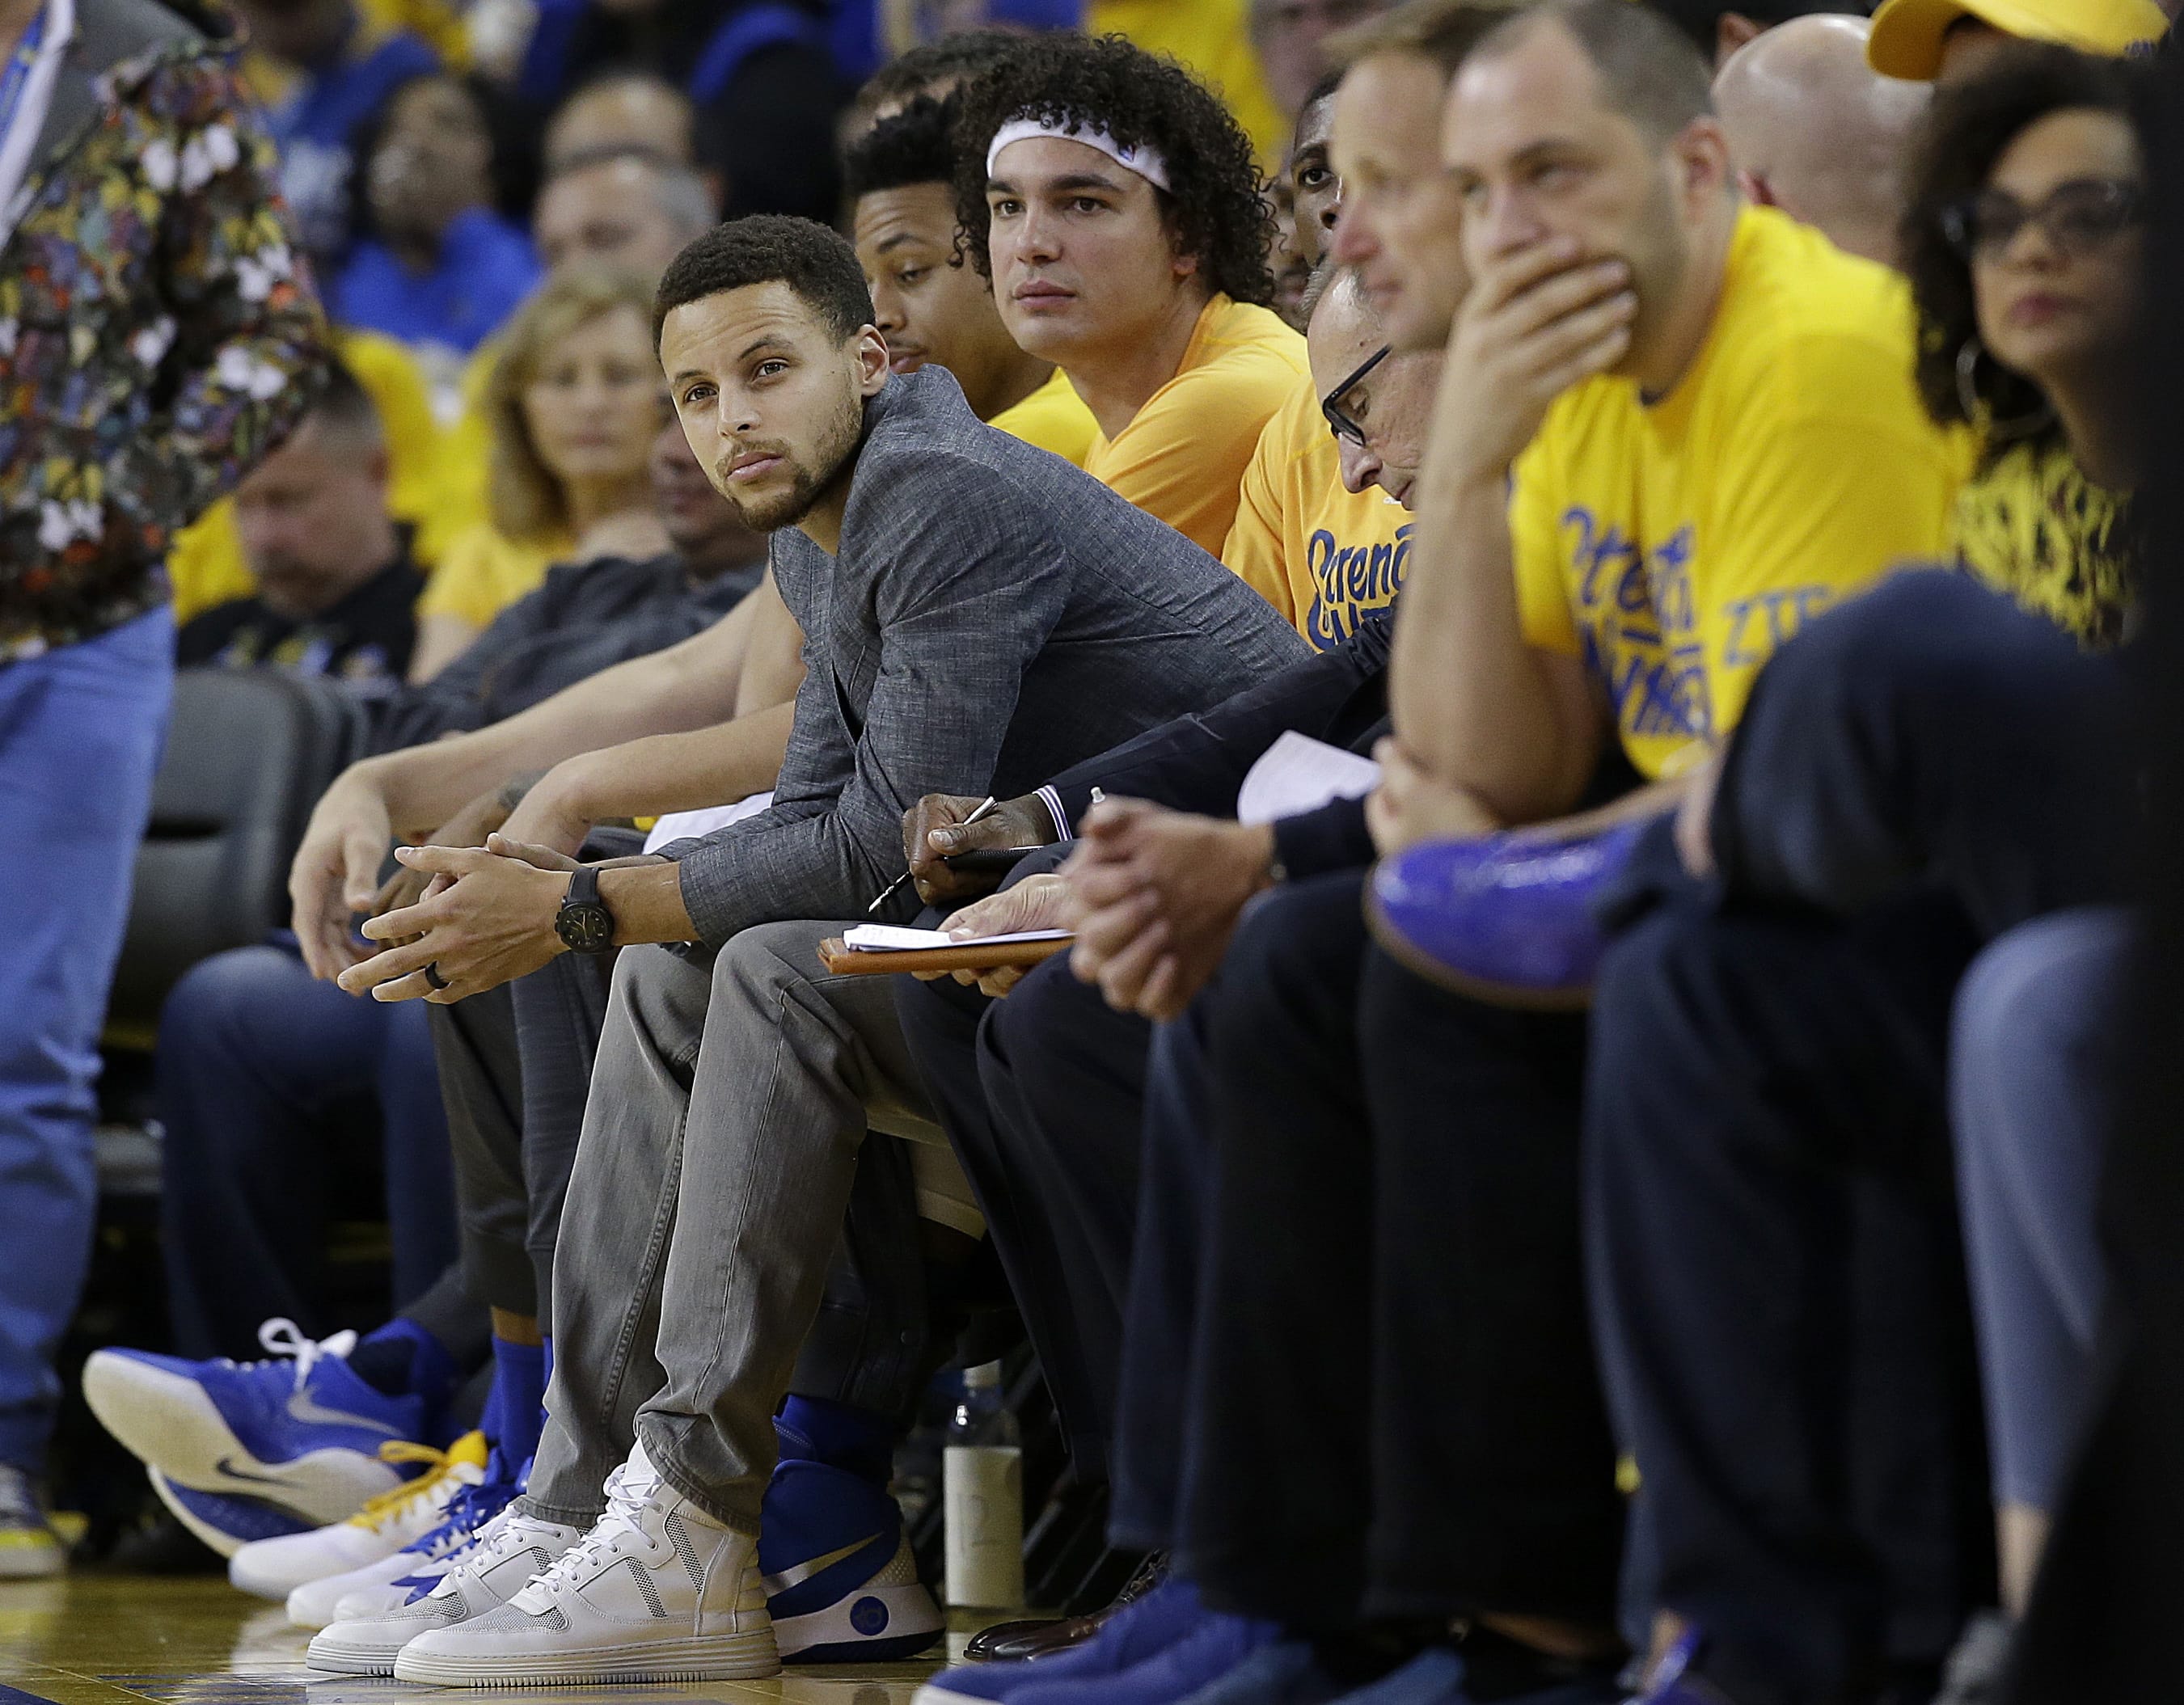 Golden State Warriors guard Stephen Curry, center left, sits on the bench during the first half in Game 2 of a second-round NBA basketball playoff series between the Warriors and the Portland Trail Blazers in Oakland, Calif., Tuesday, May 3, 2016.